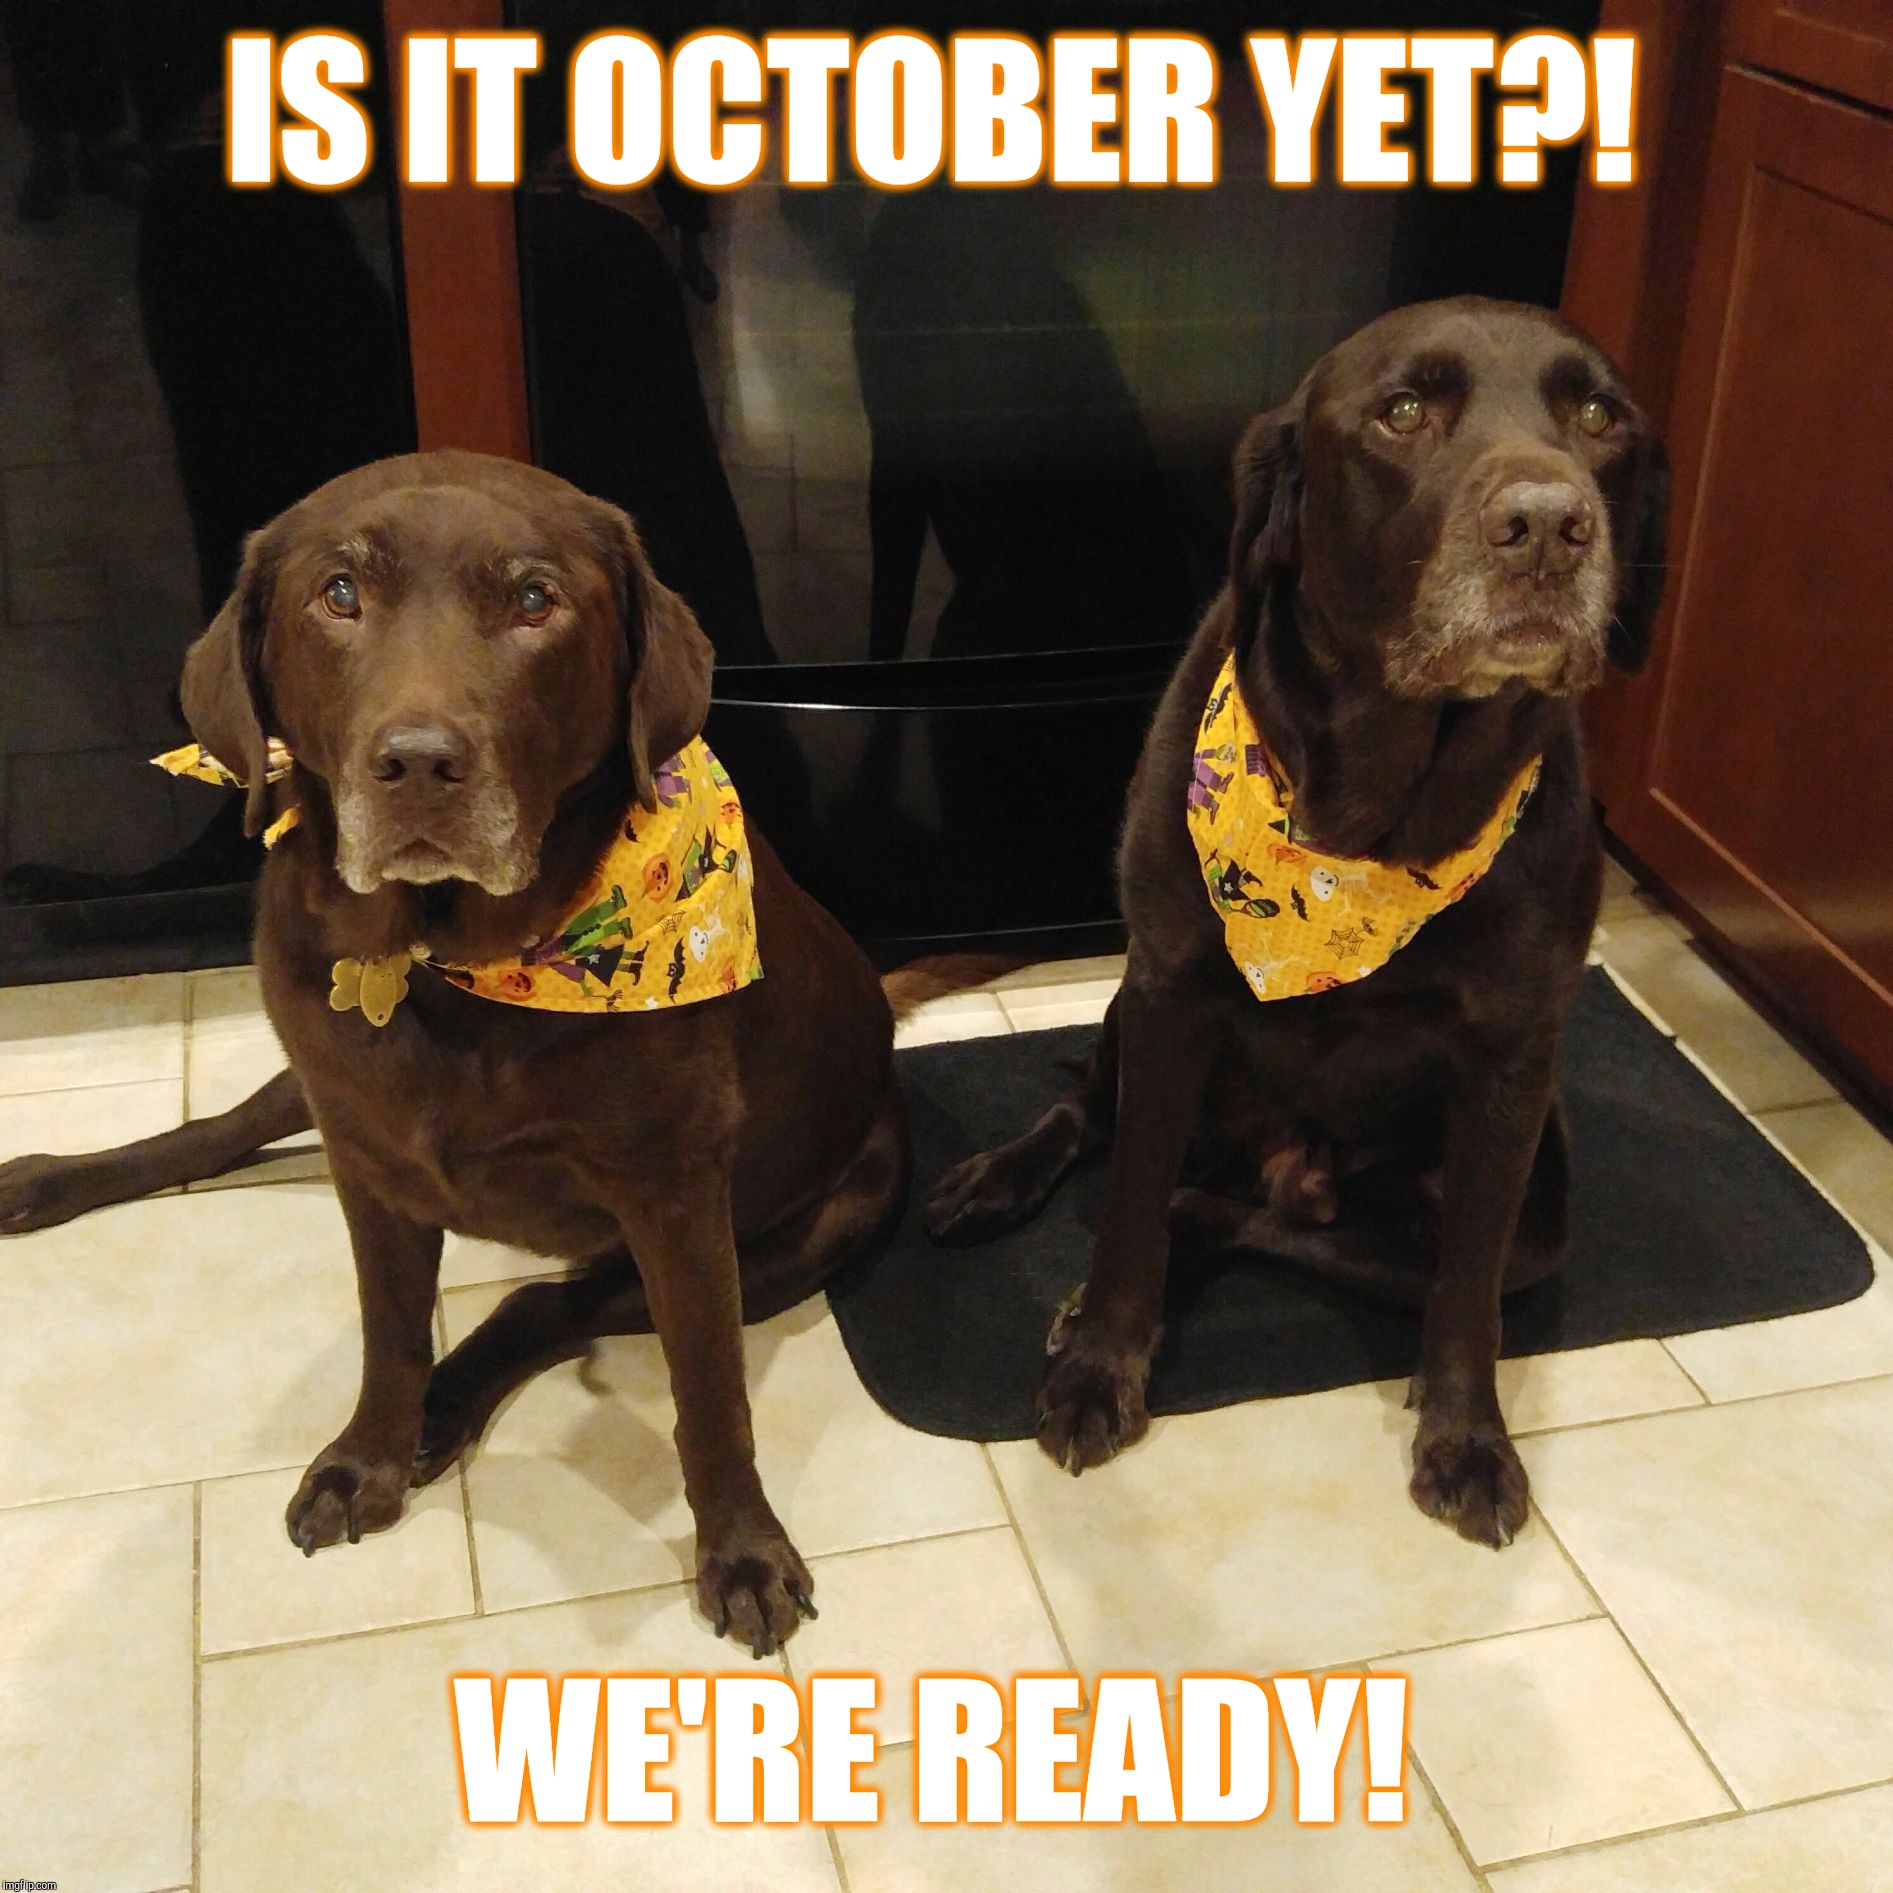 Is it October yet?  | IS IT OCTOBER YET?! WE'RE READY! | image tagged in chuckie the chocolate lab,october,fall,autumn,cute,dog memes | made w/ Imgflip meme maker